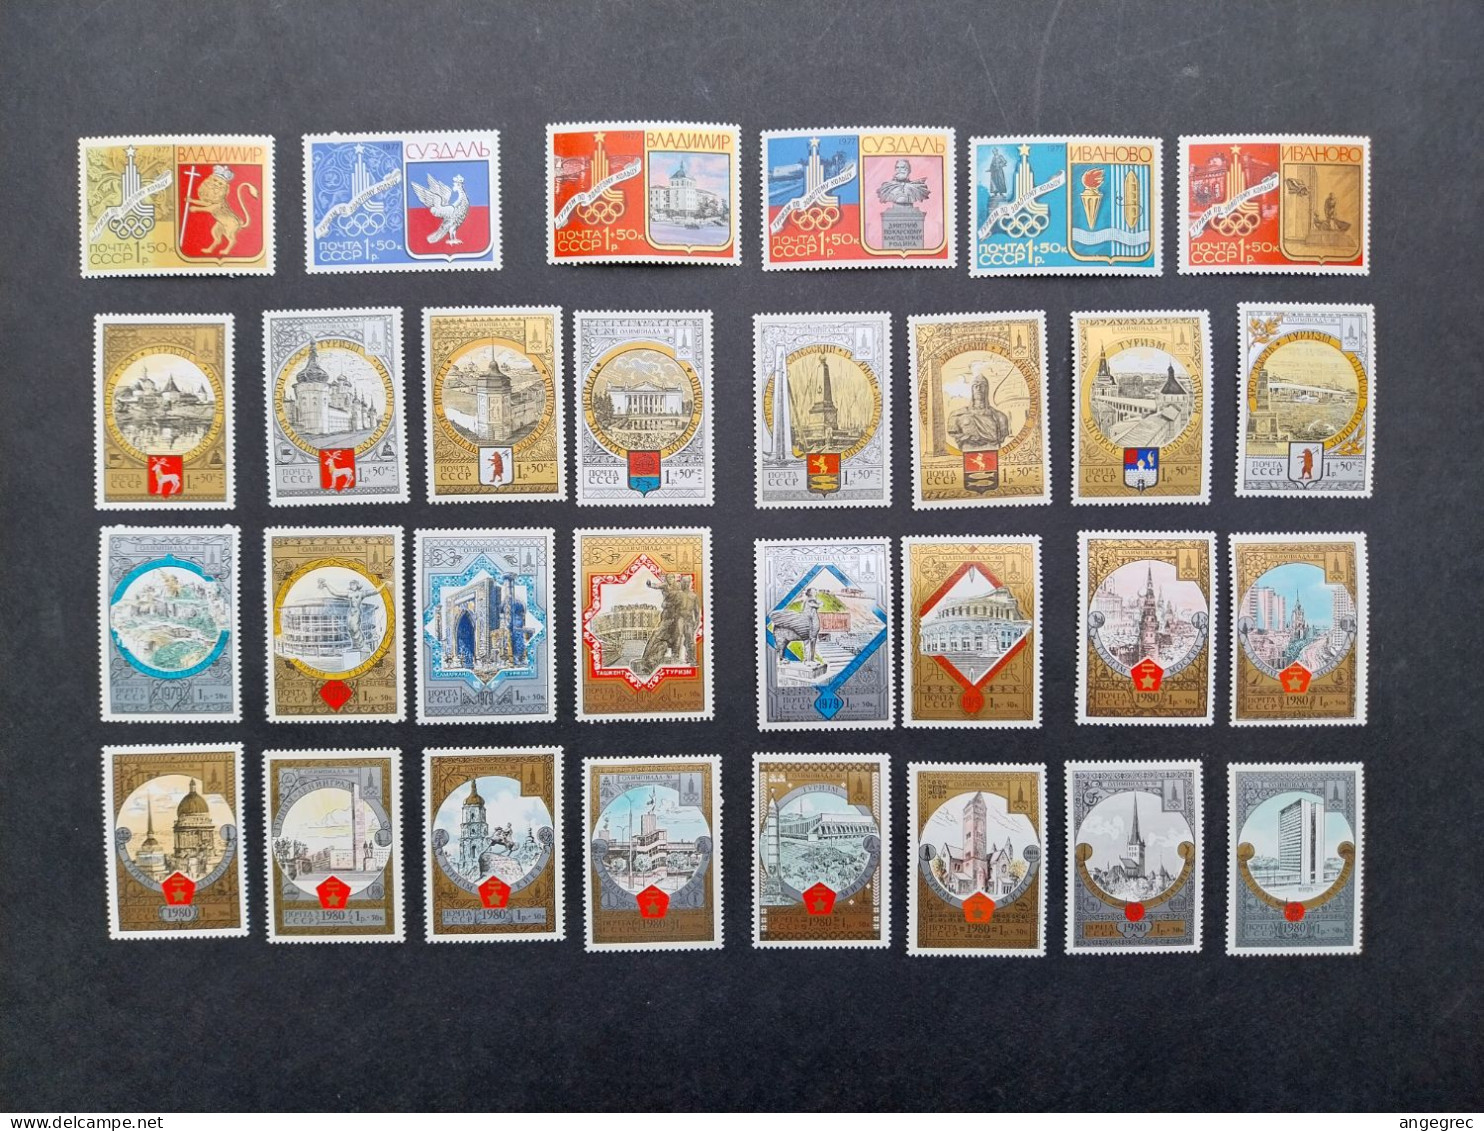 Russie Timbre Lot De 30 Ceinture D'or - Golden Rings Complet Set 30 Stamps Olympiade 80 Jeux Olympiques Neuf ** - Neufs